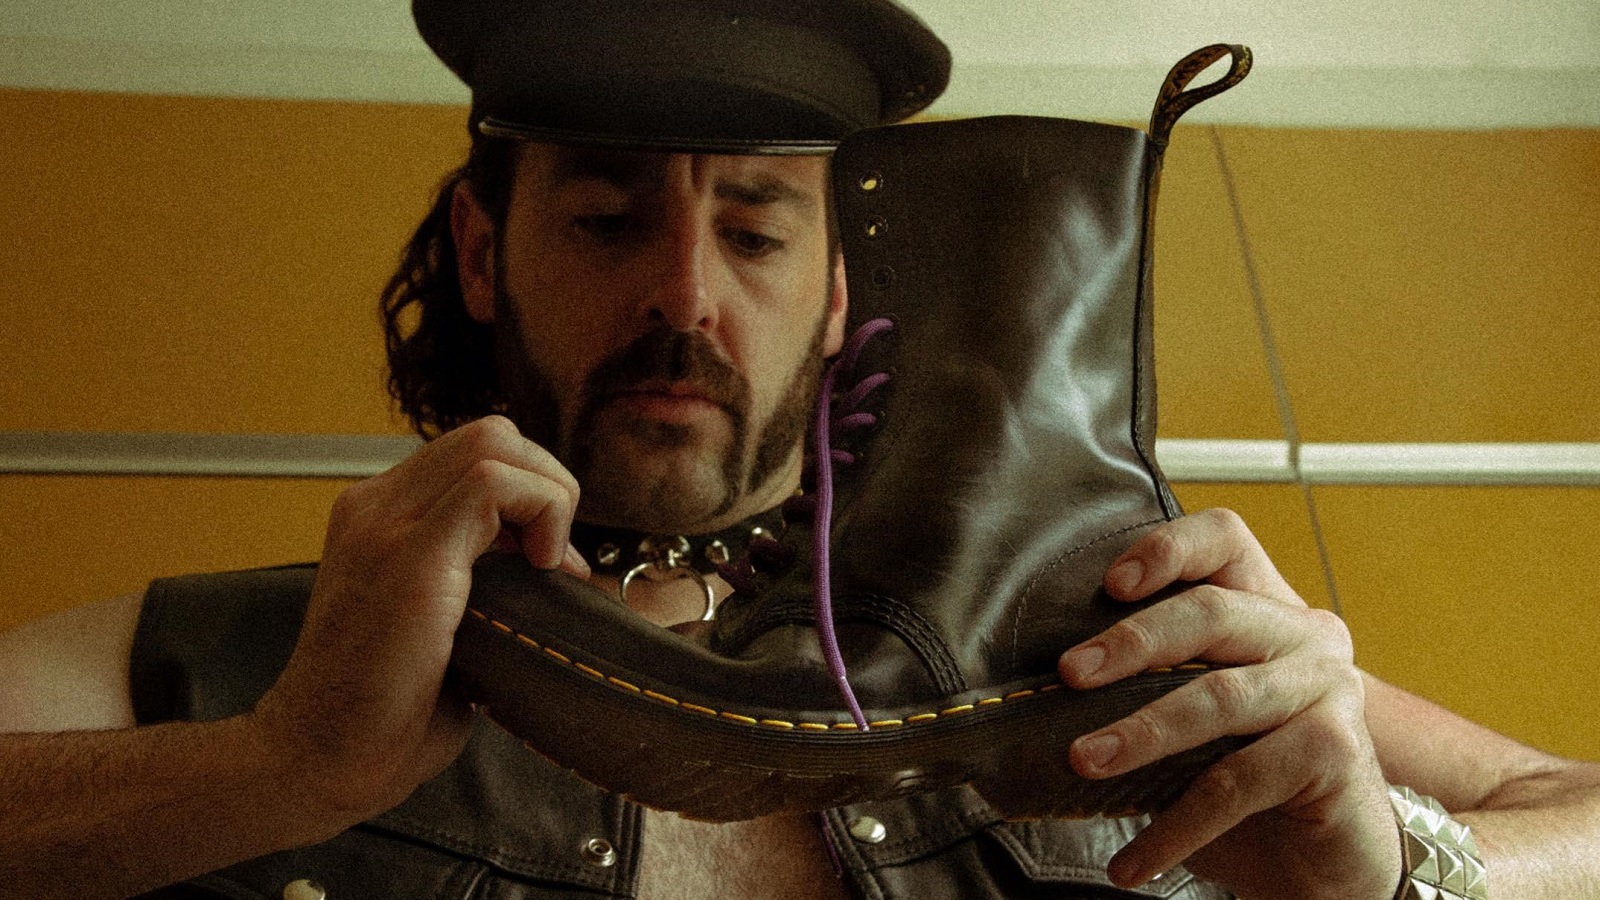 Dr. Martens’ Fans Share Their Techniques on Breaking In Their DMs